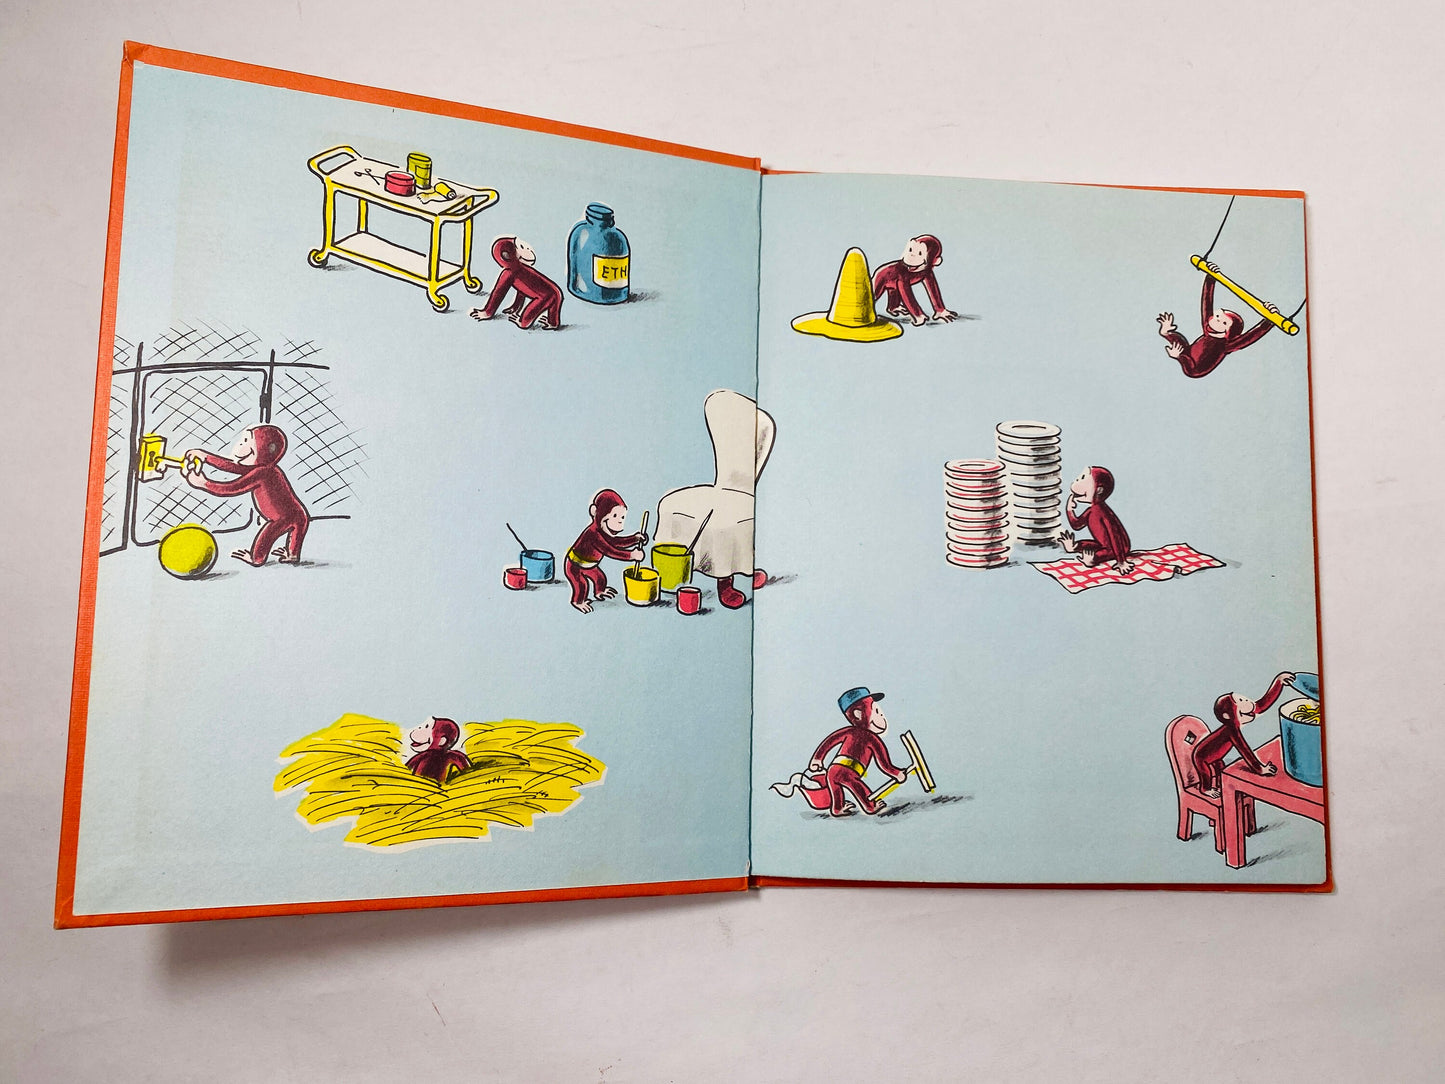 Curious George Gets a Job vintage children's book circa by HA Rey. Curious George vignette in red on yellow cloth. Houghton Mifflin 1975